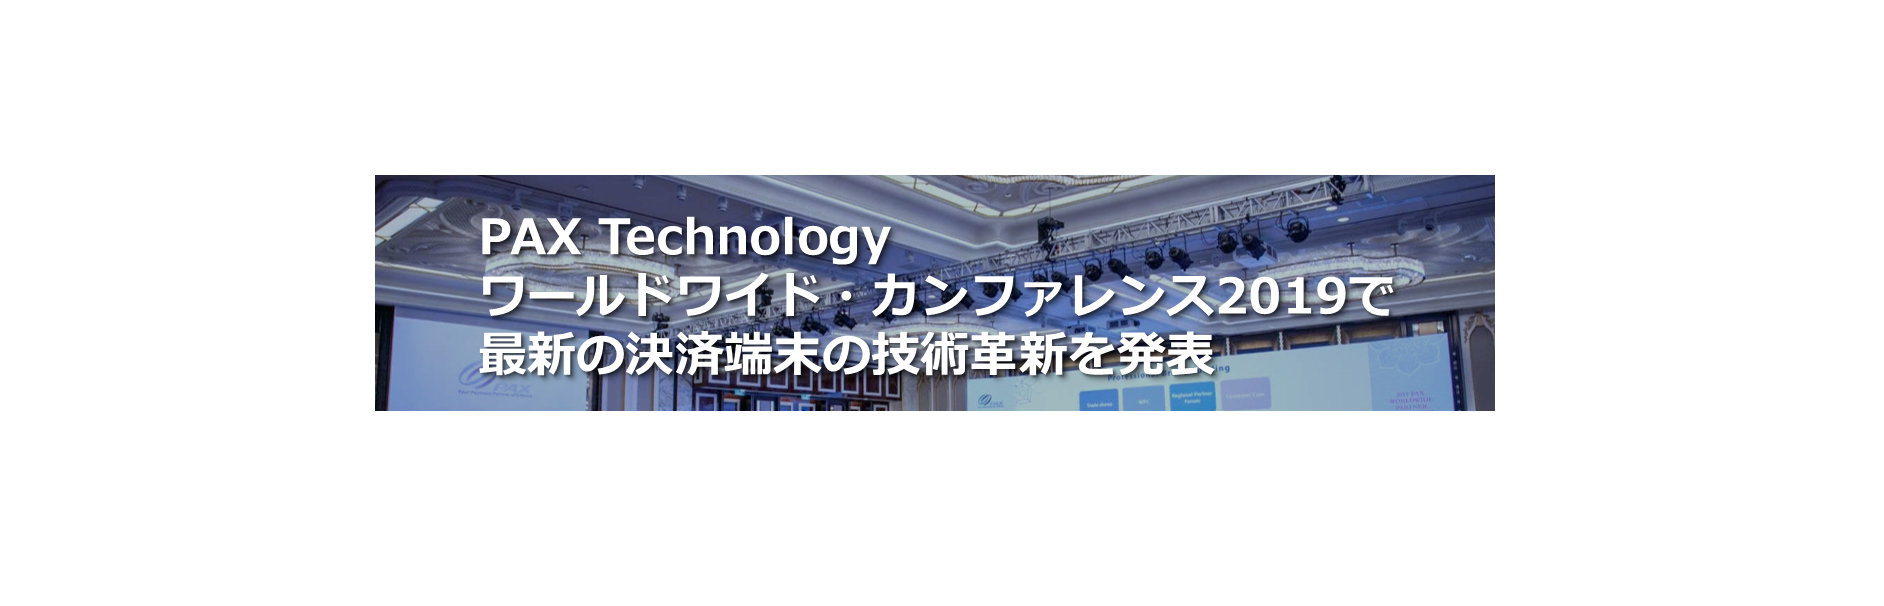 PAYサービス PAX Technology